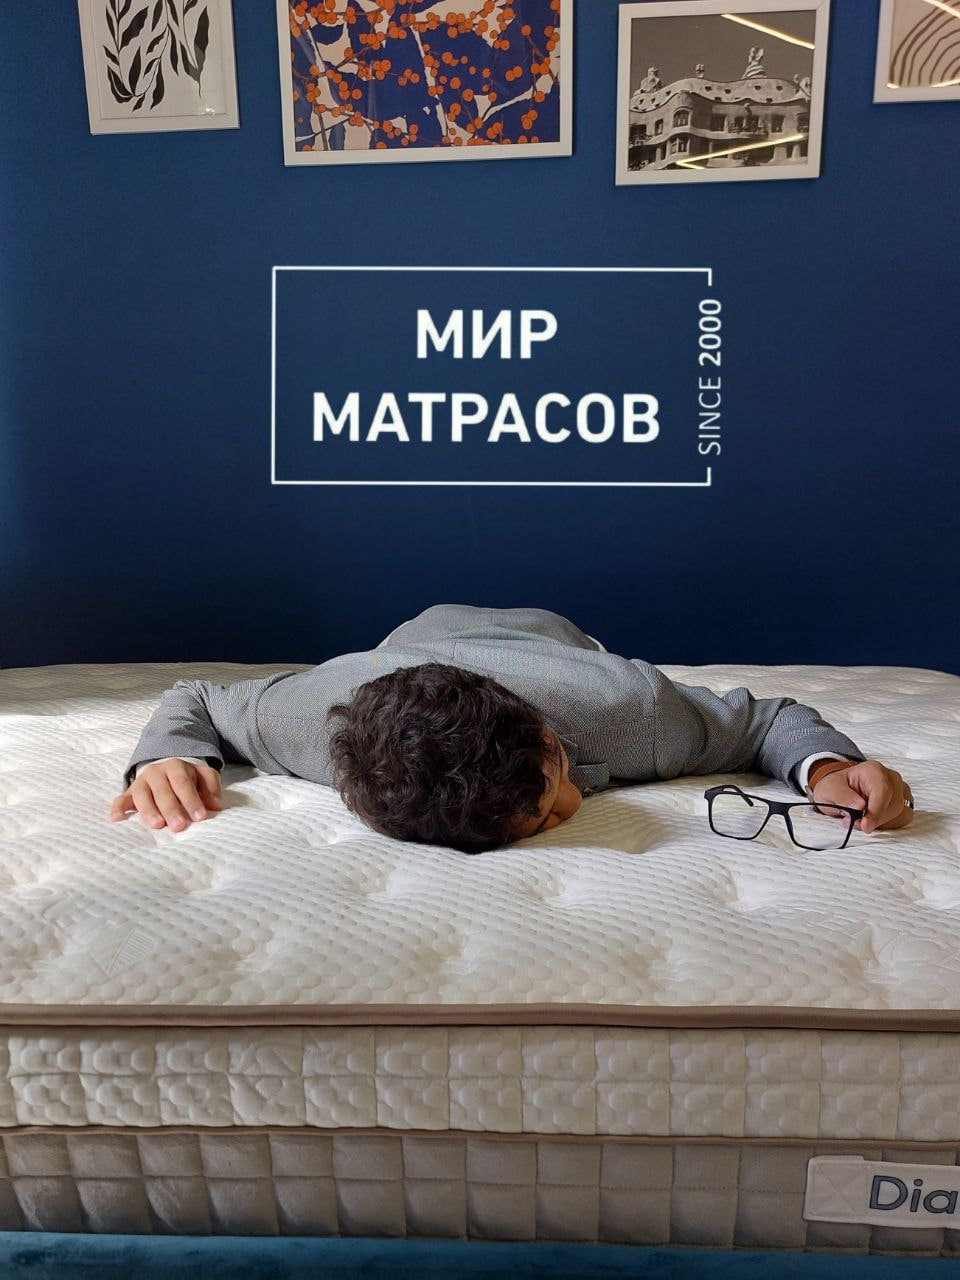 Thinking About ортопедический матрас? 10 Reasons Why It's Time To Stop!